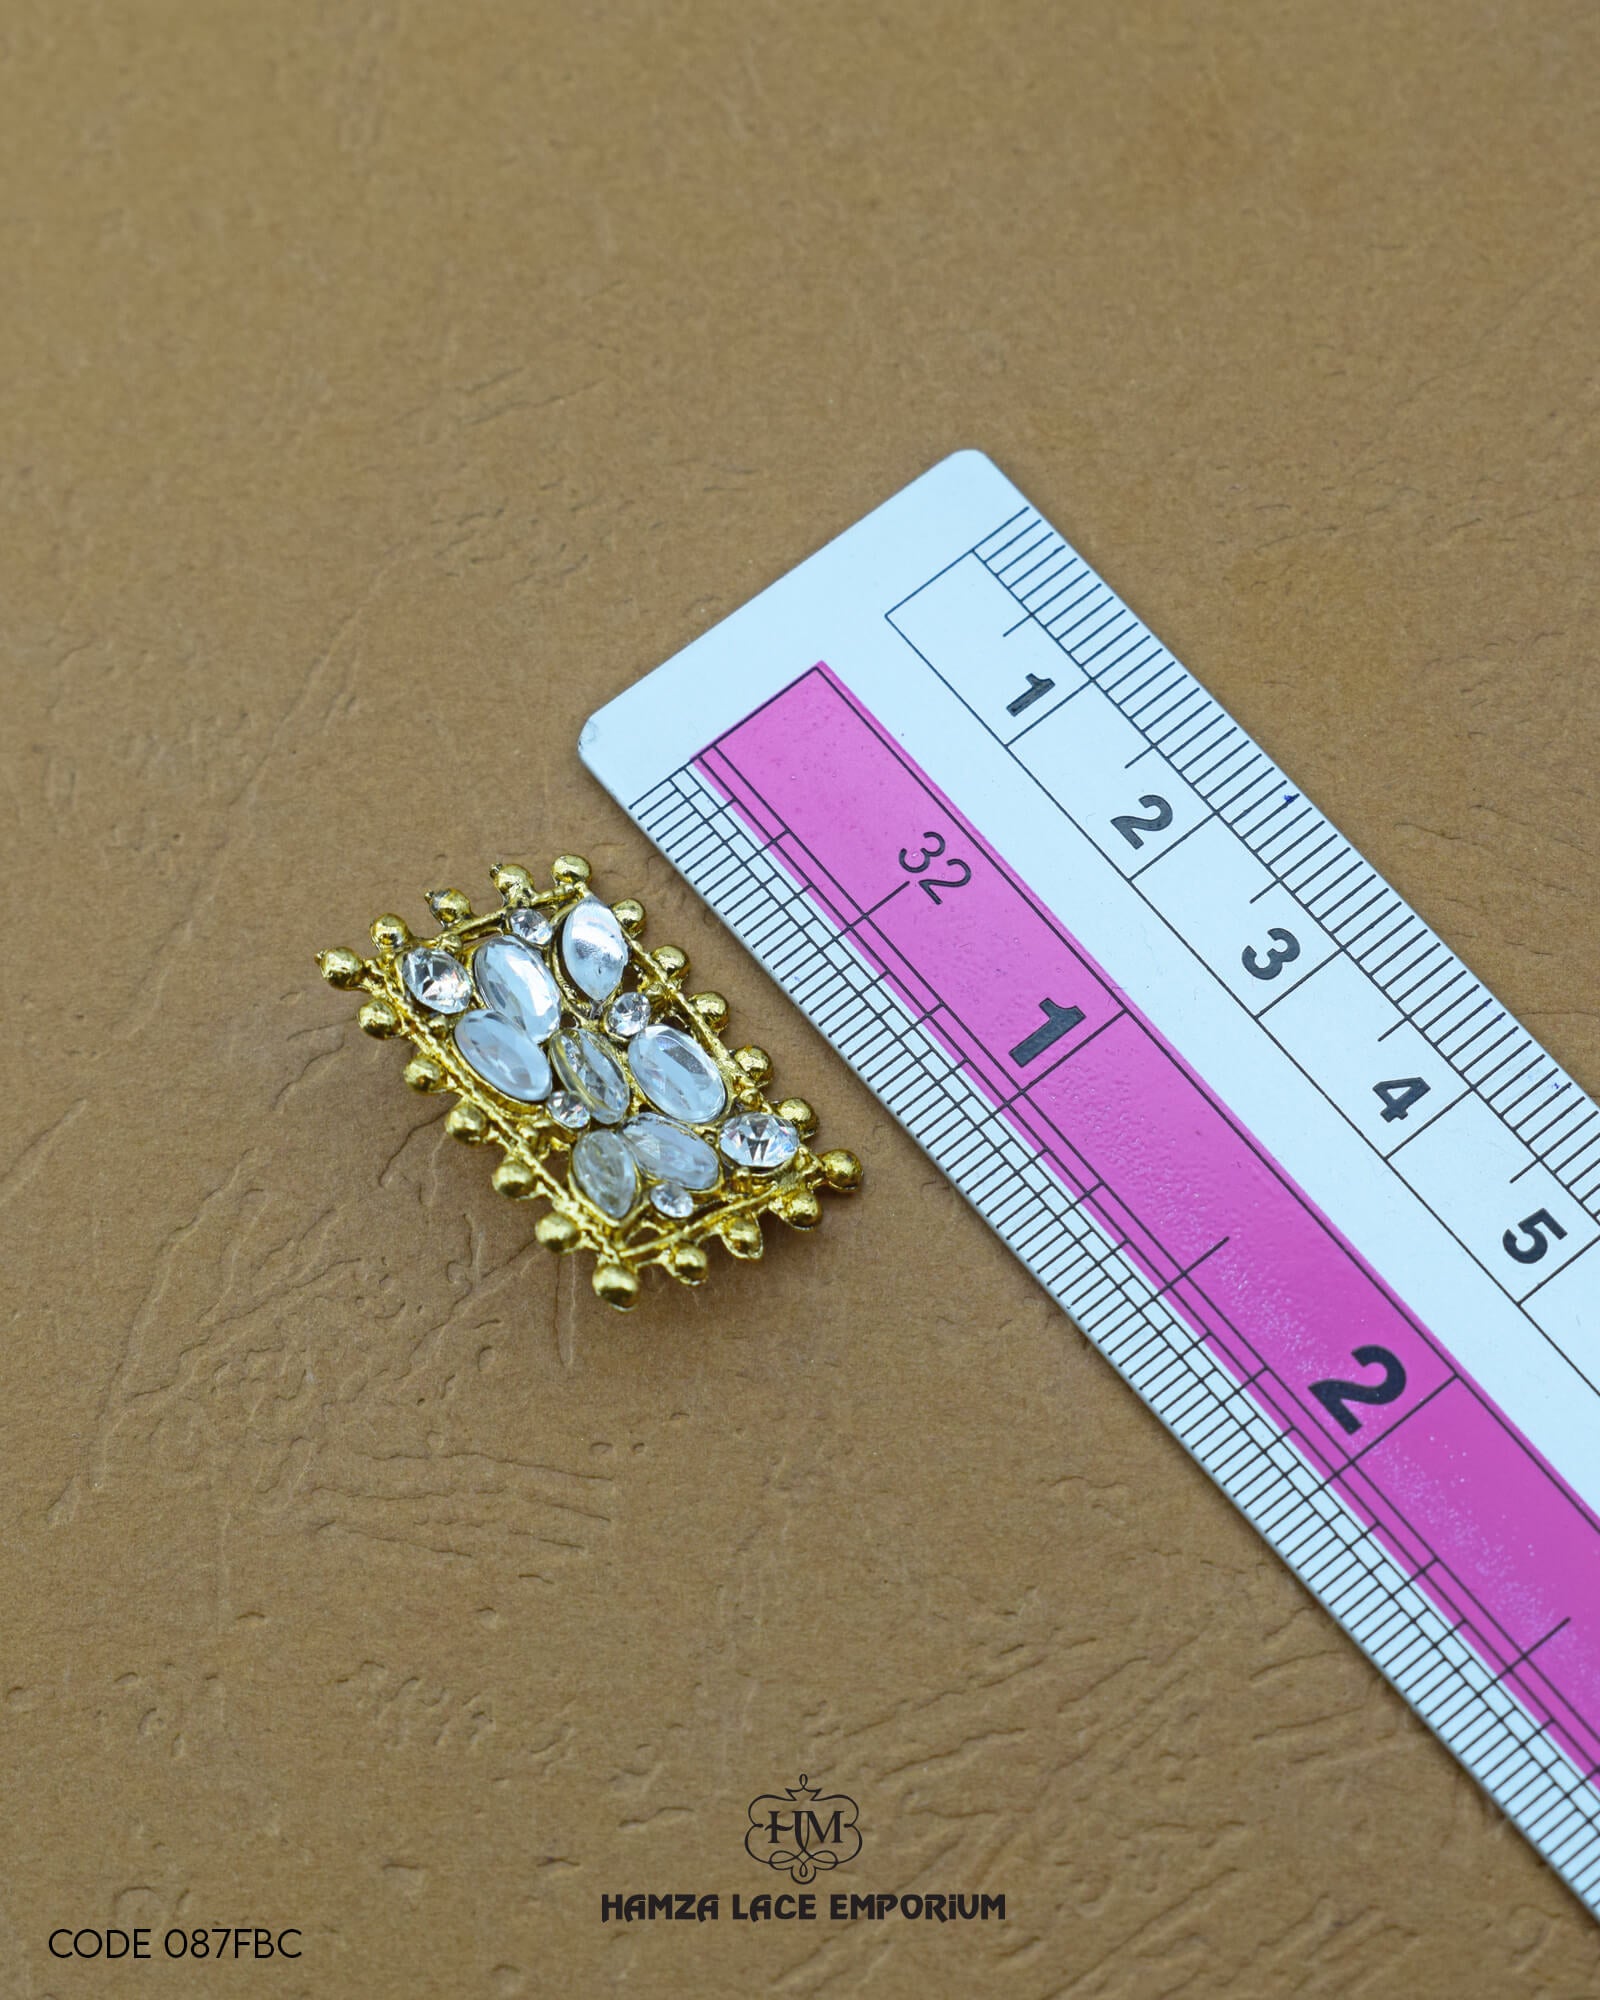 The size of the 'Fancy Button FBC087' is indicated using a ruler.